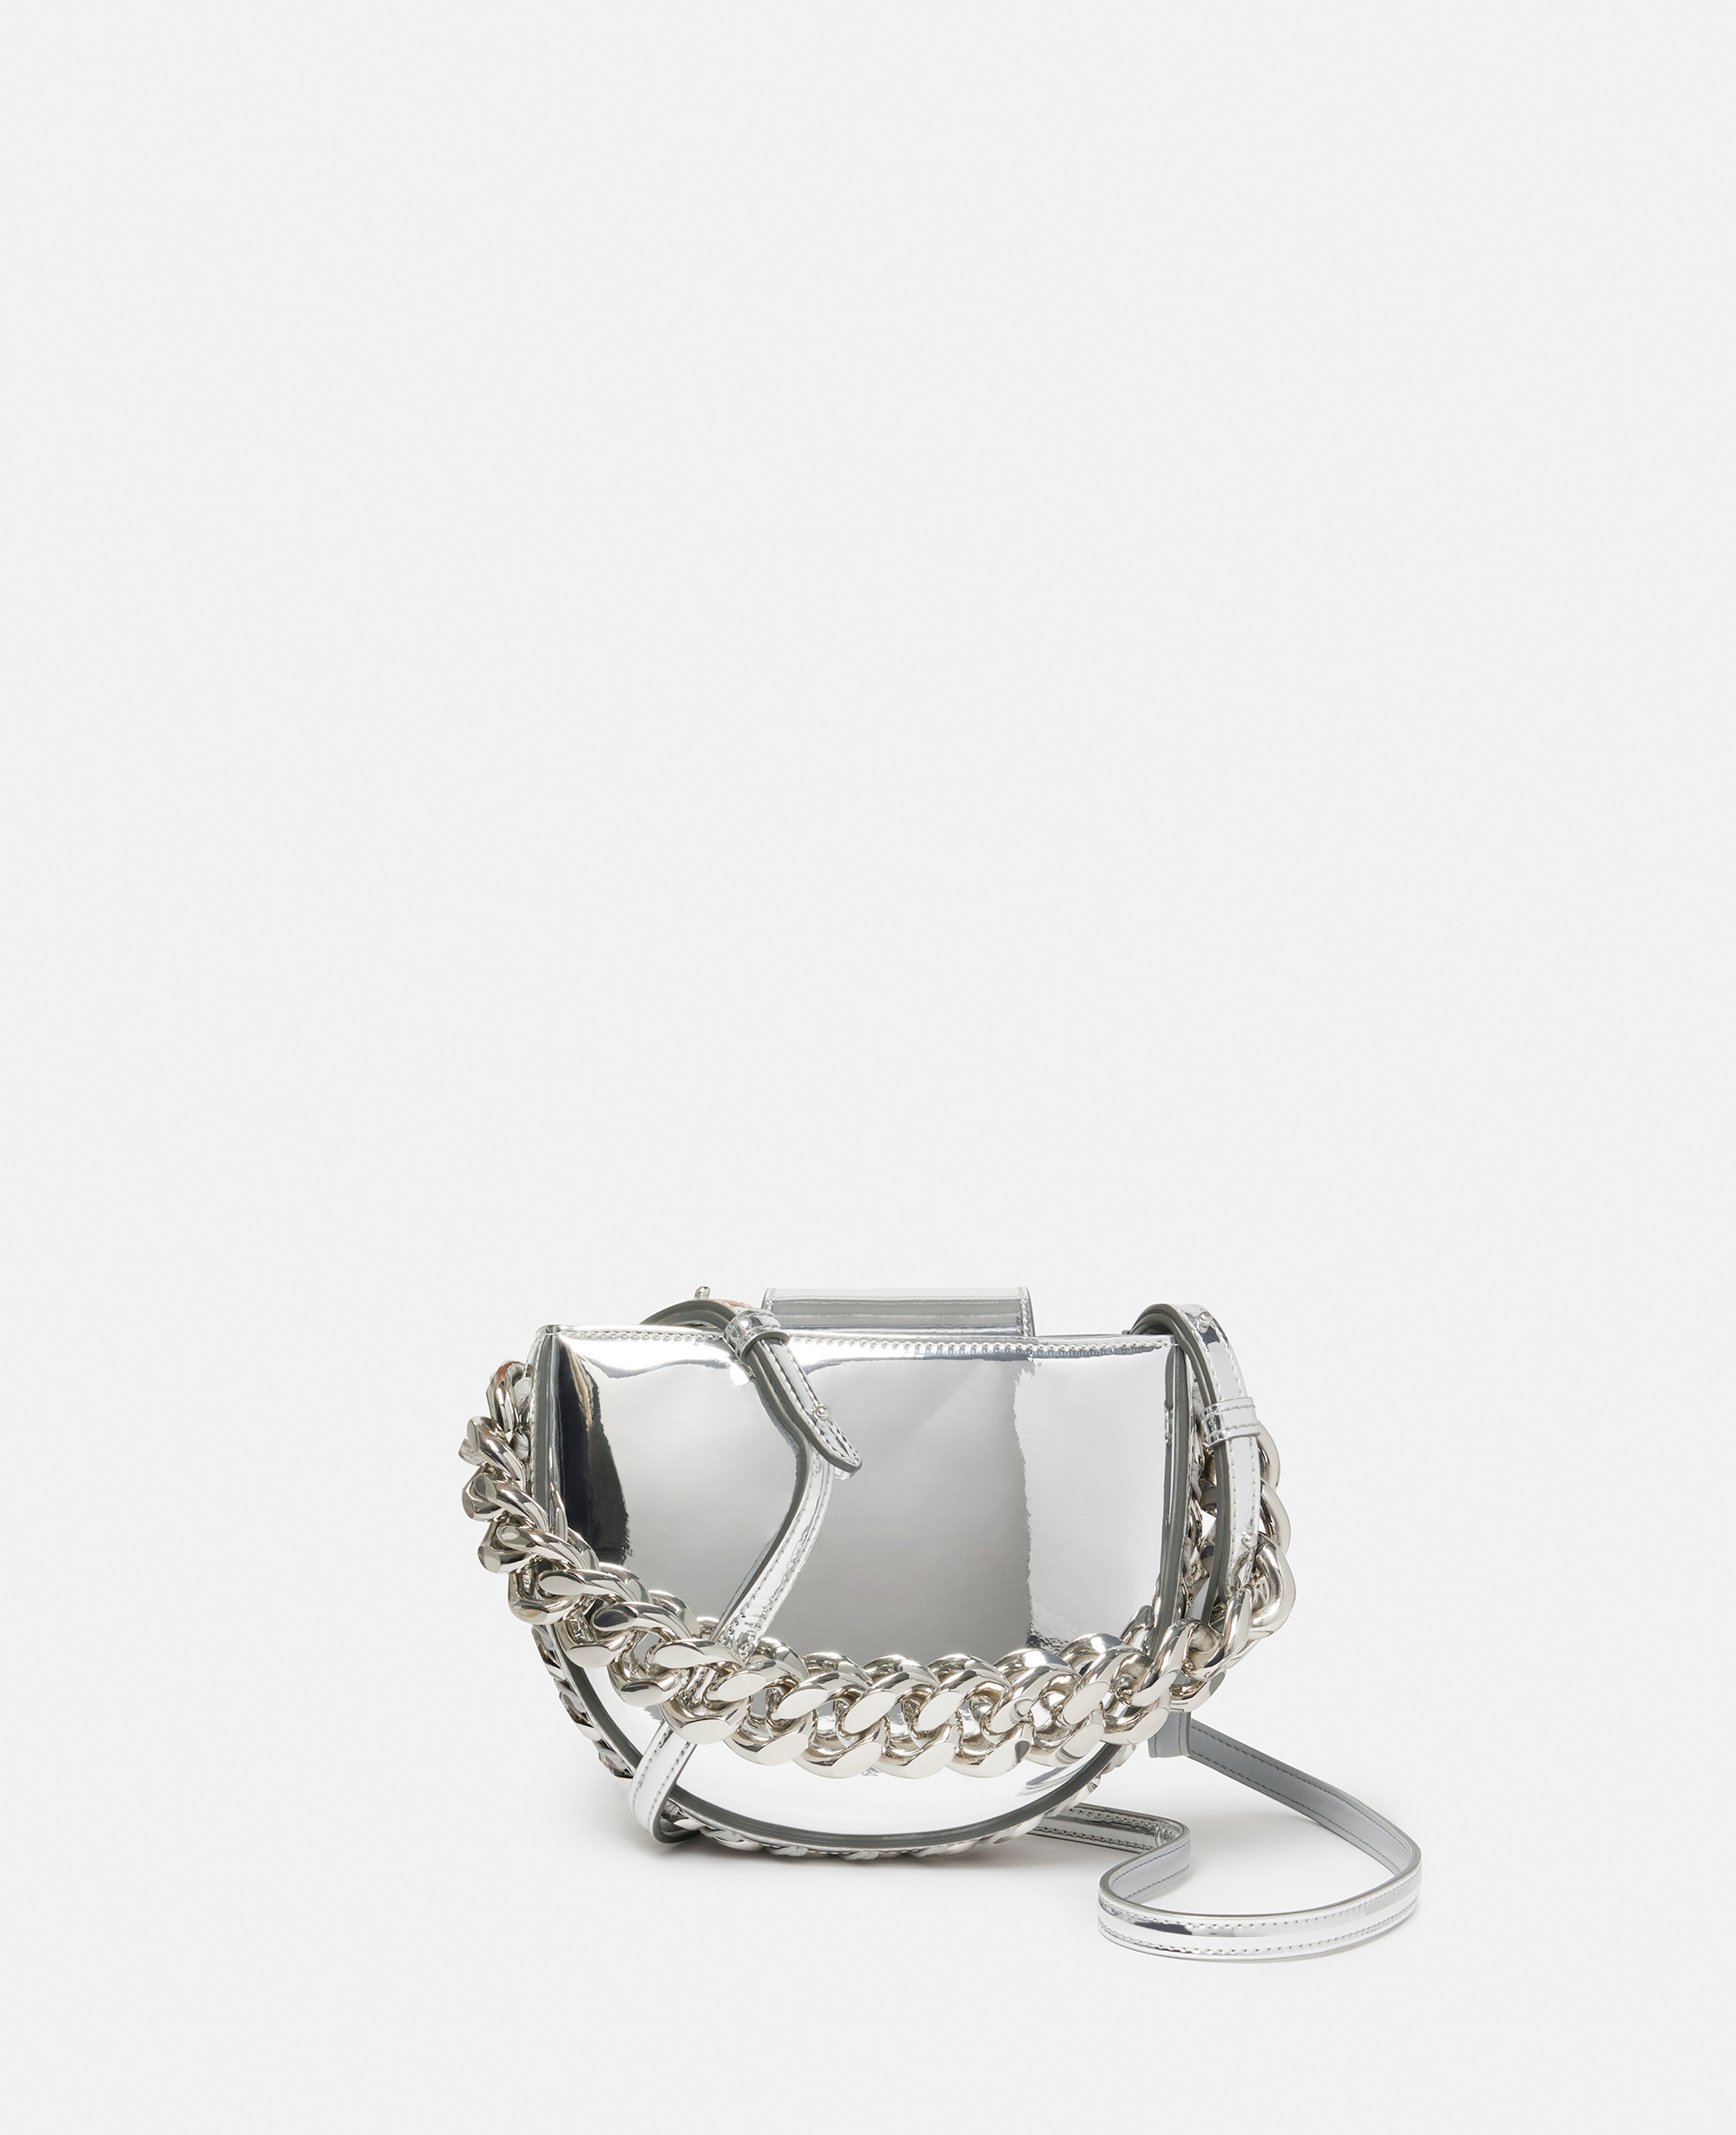 Stella Mccartney Frayme Mirrored Small Shoulder Bag In Silver